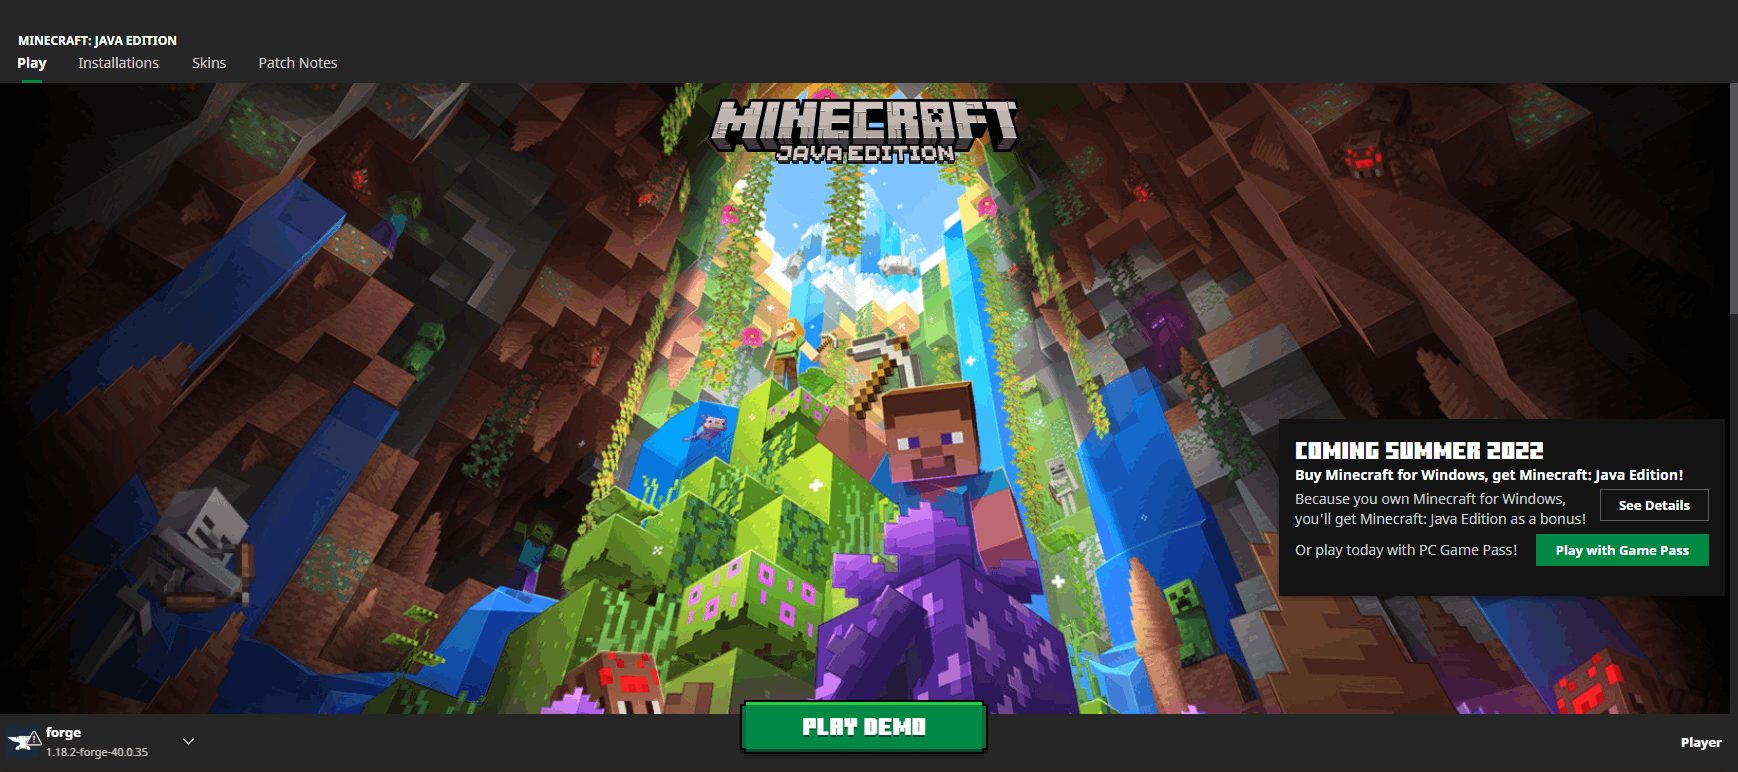 Coming November 2 to Xbox Game Pass for PC: Minecraft Java and